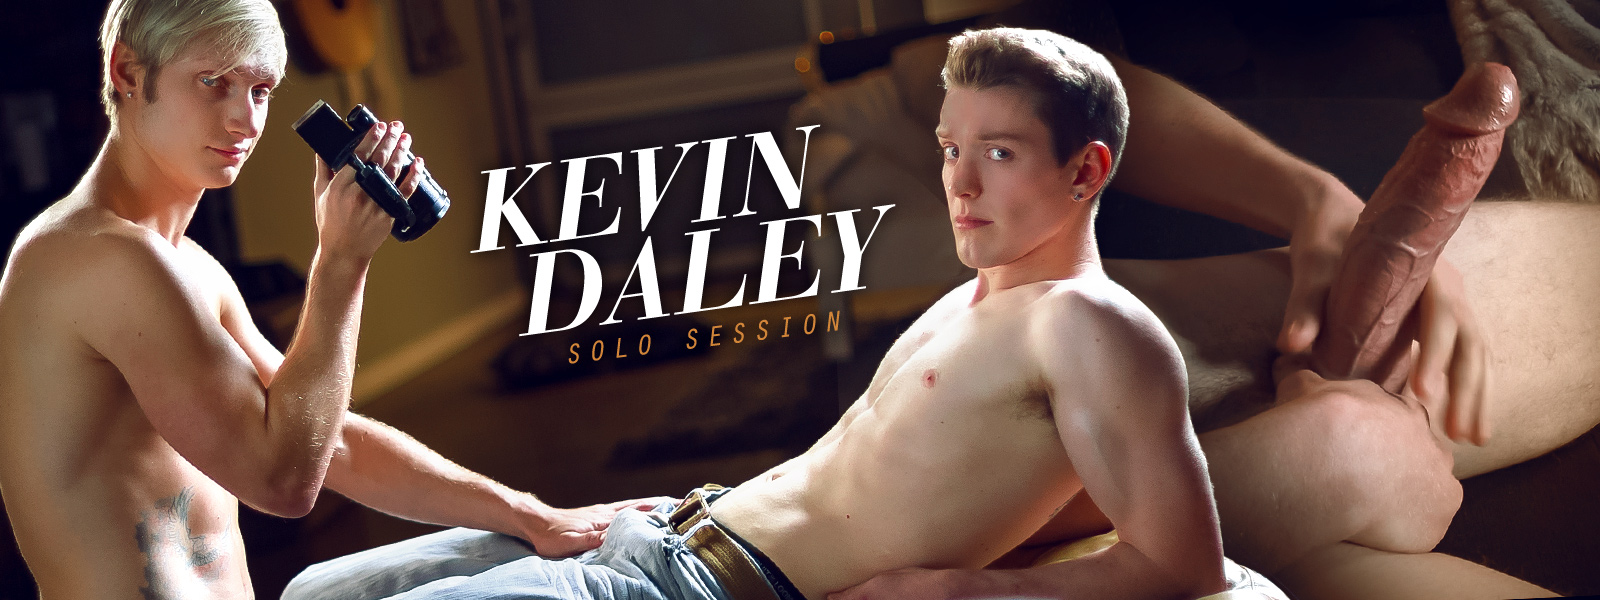 Kevin Daley Solo Session